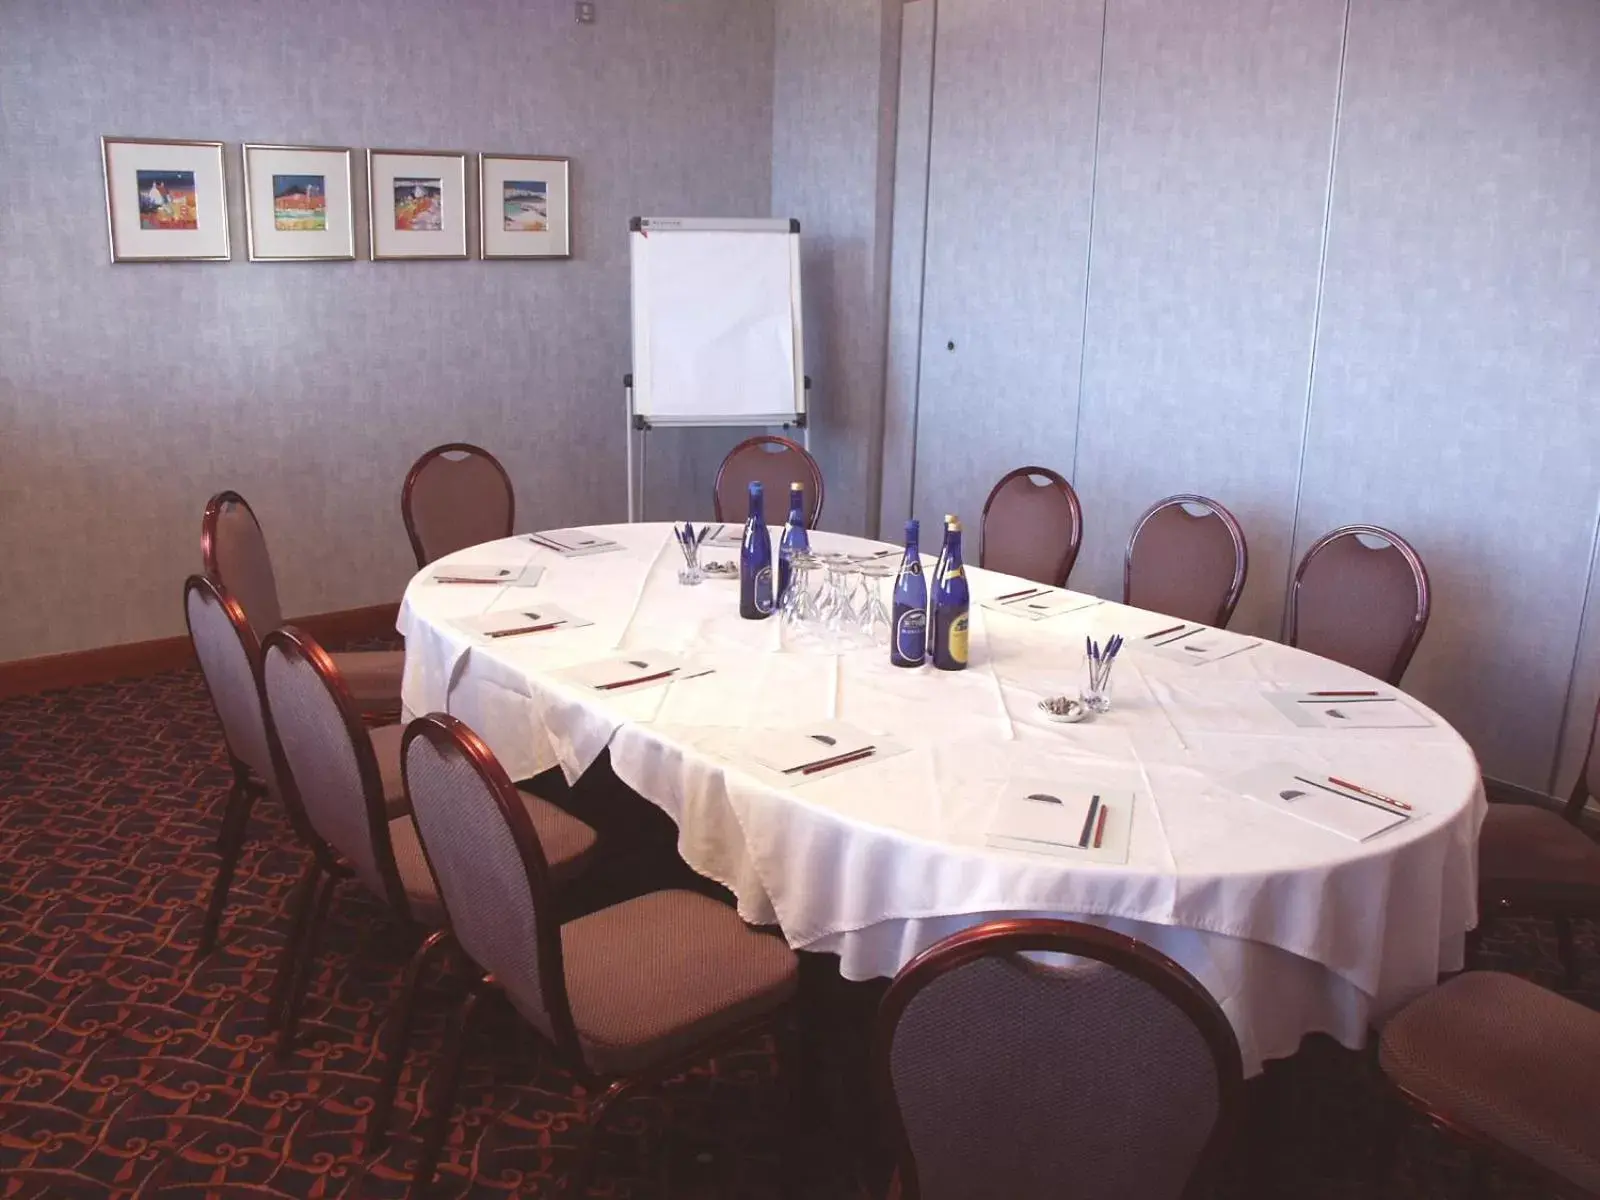 Meeting/conference room in Horizon Hotel